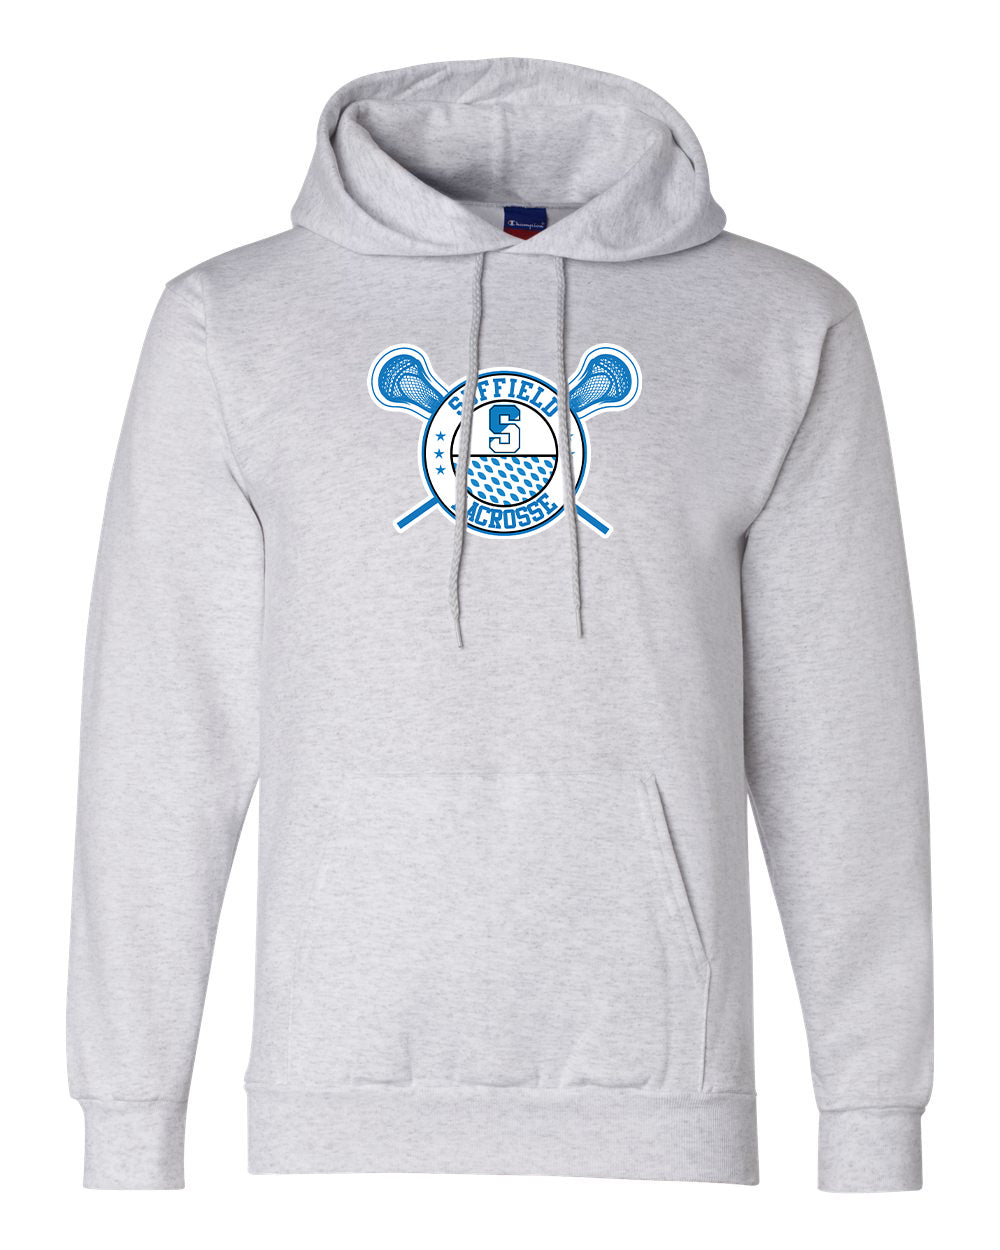 Copy of Suffield Youth Lacrosse - Adult Champion Hoodie "Circle" - S700 (color options available)